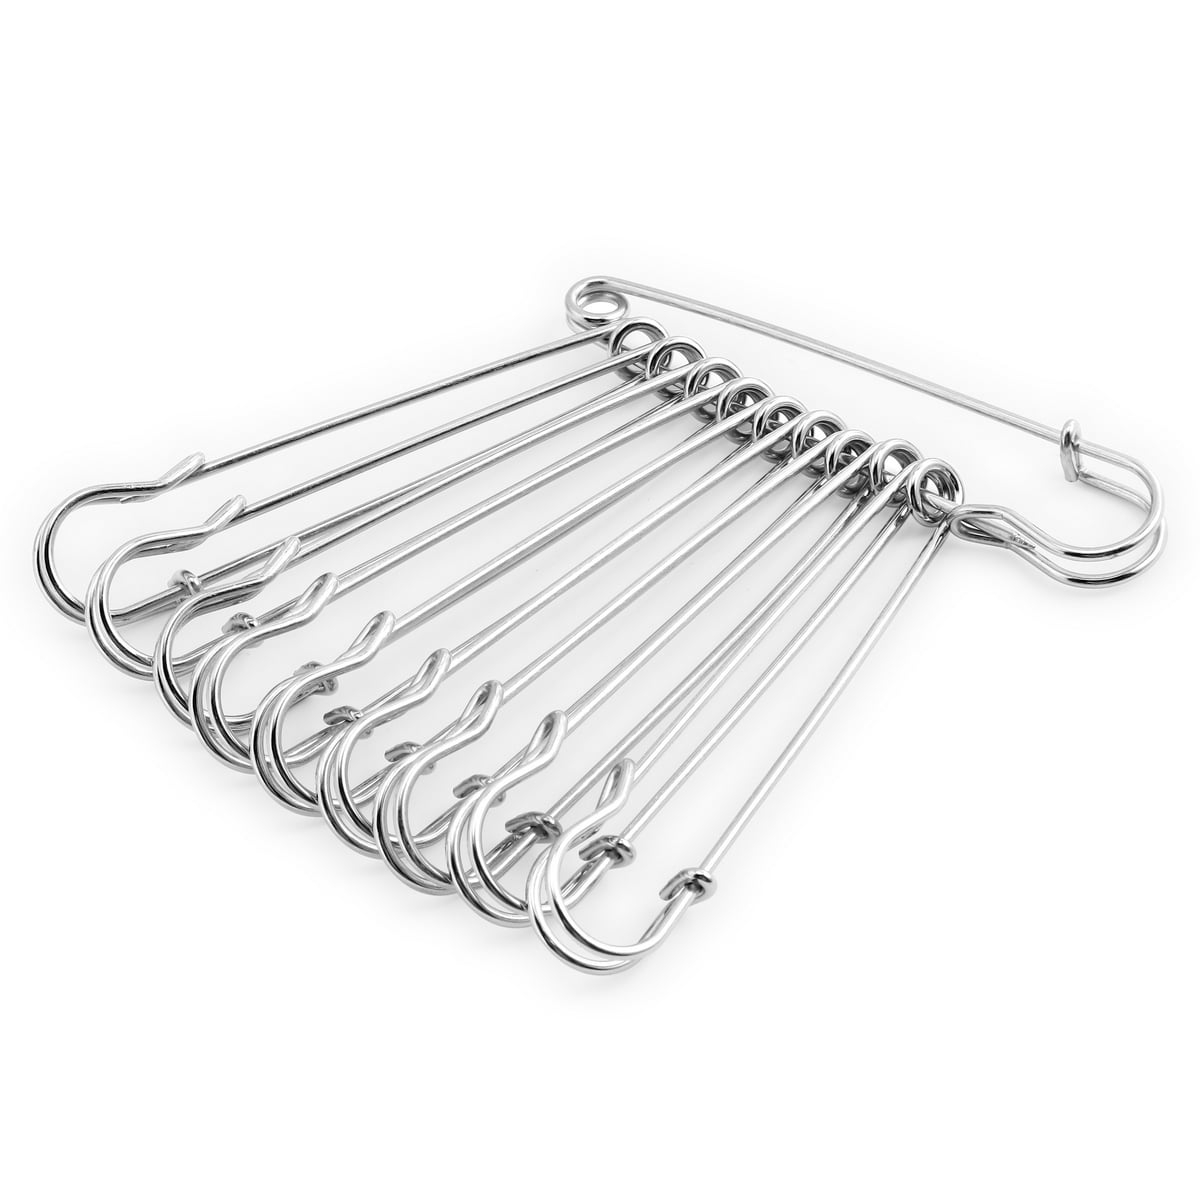  Erewa 6 Pack Large Safety Pins, 5 Inches Heavy Duty Stainless  Steel Oversize Safety Pins, Extra Large Pins for Blankets, Heavy Laundry,  Crafts and Decorations